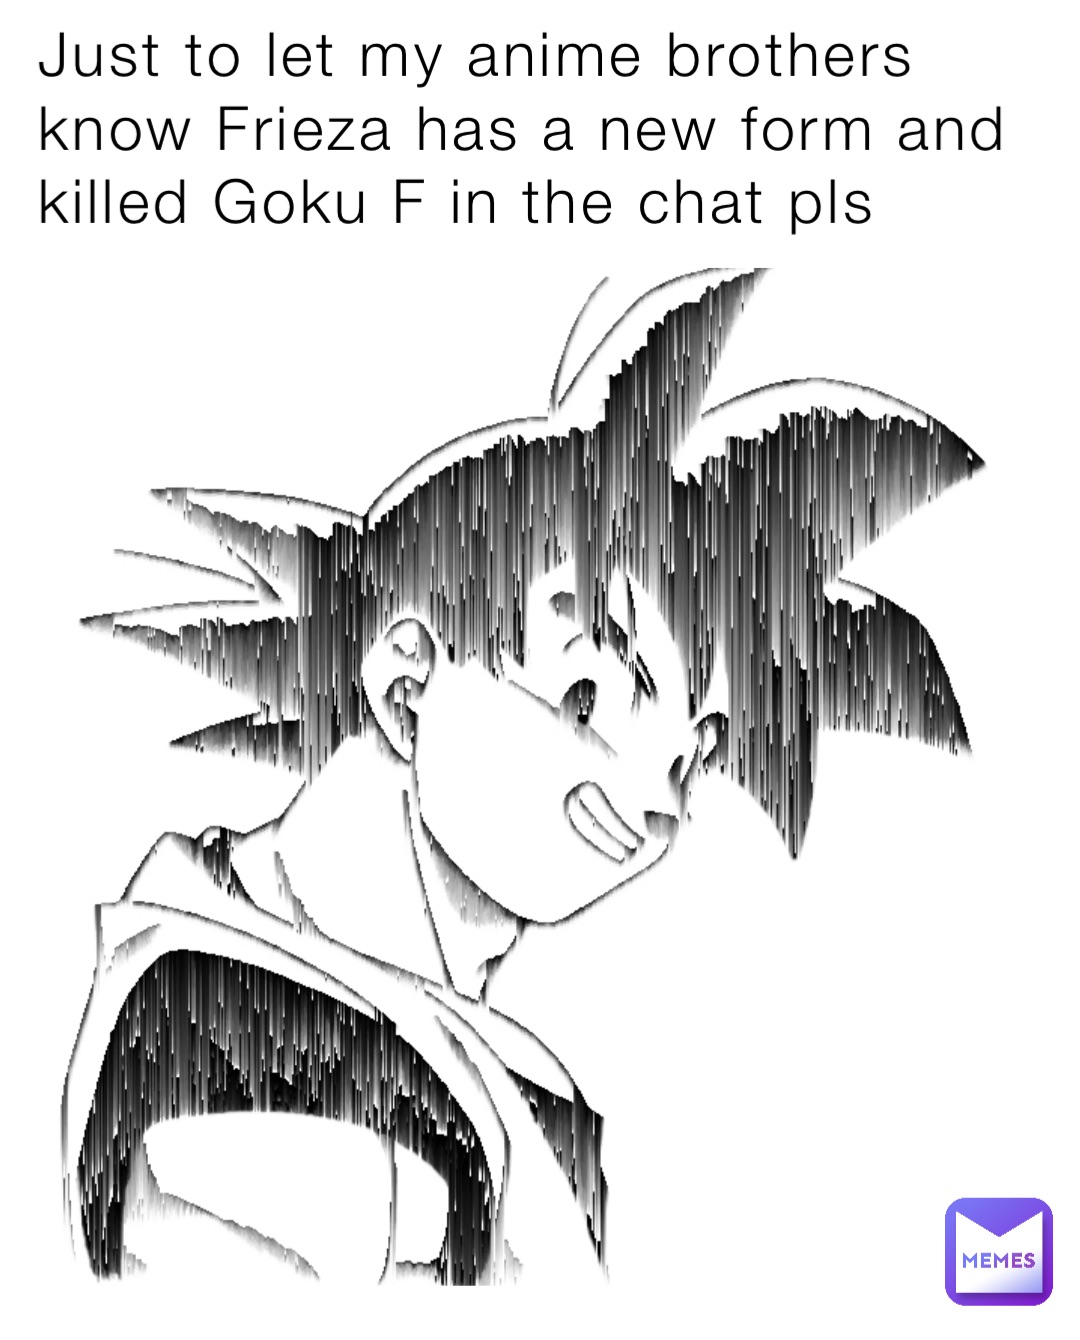 Just to let my anime brothers know Frieza has a new form and killed Goku F in the chat pls